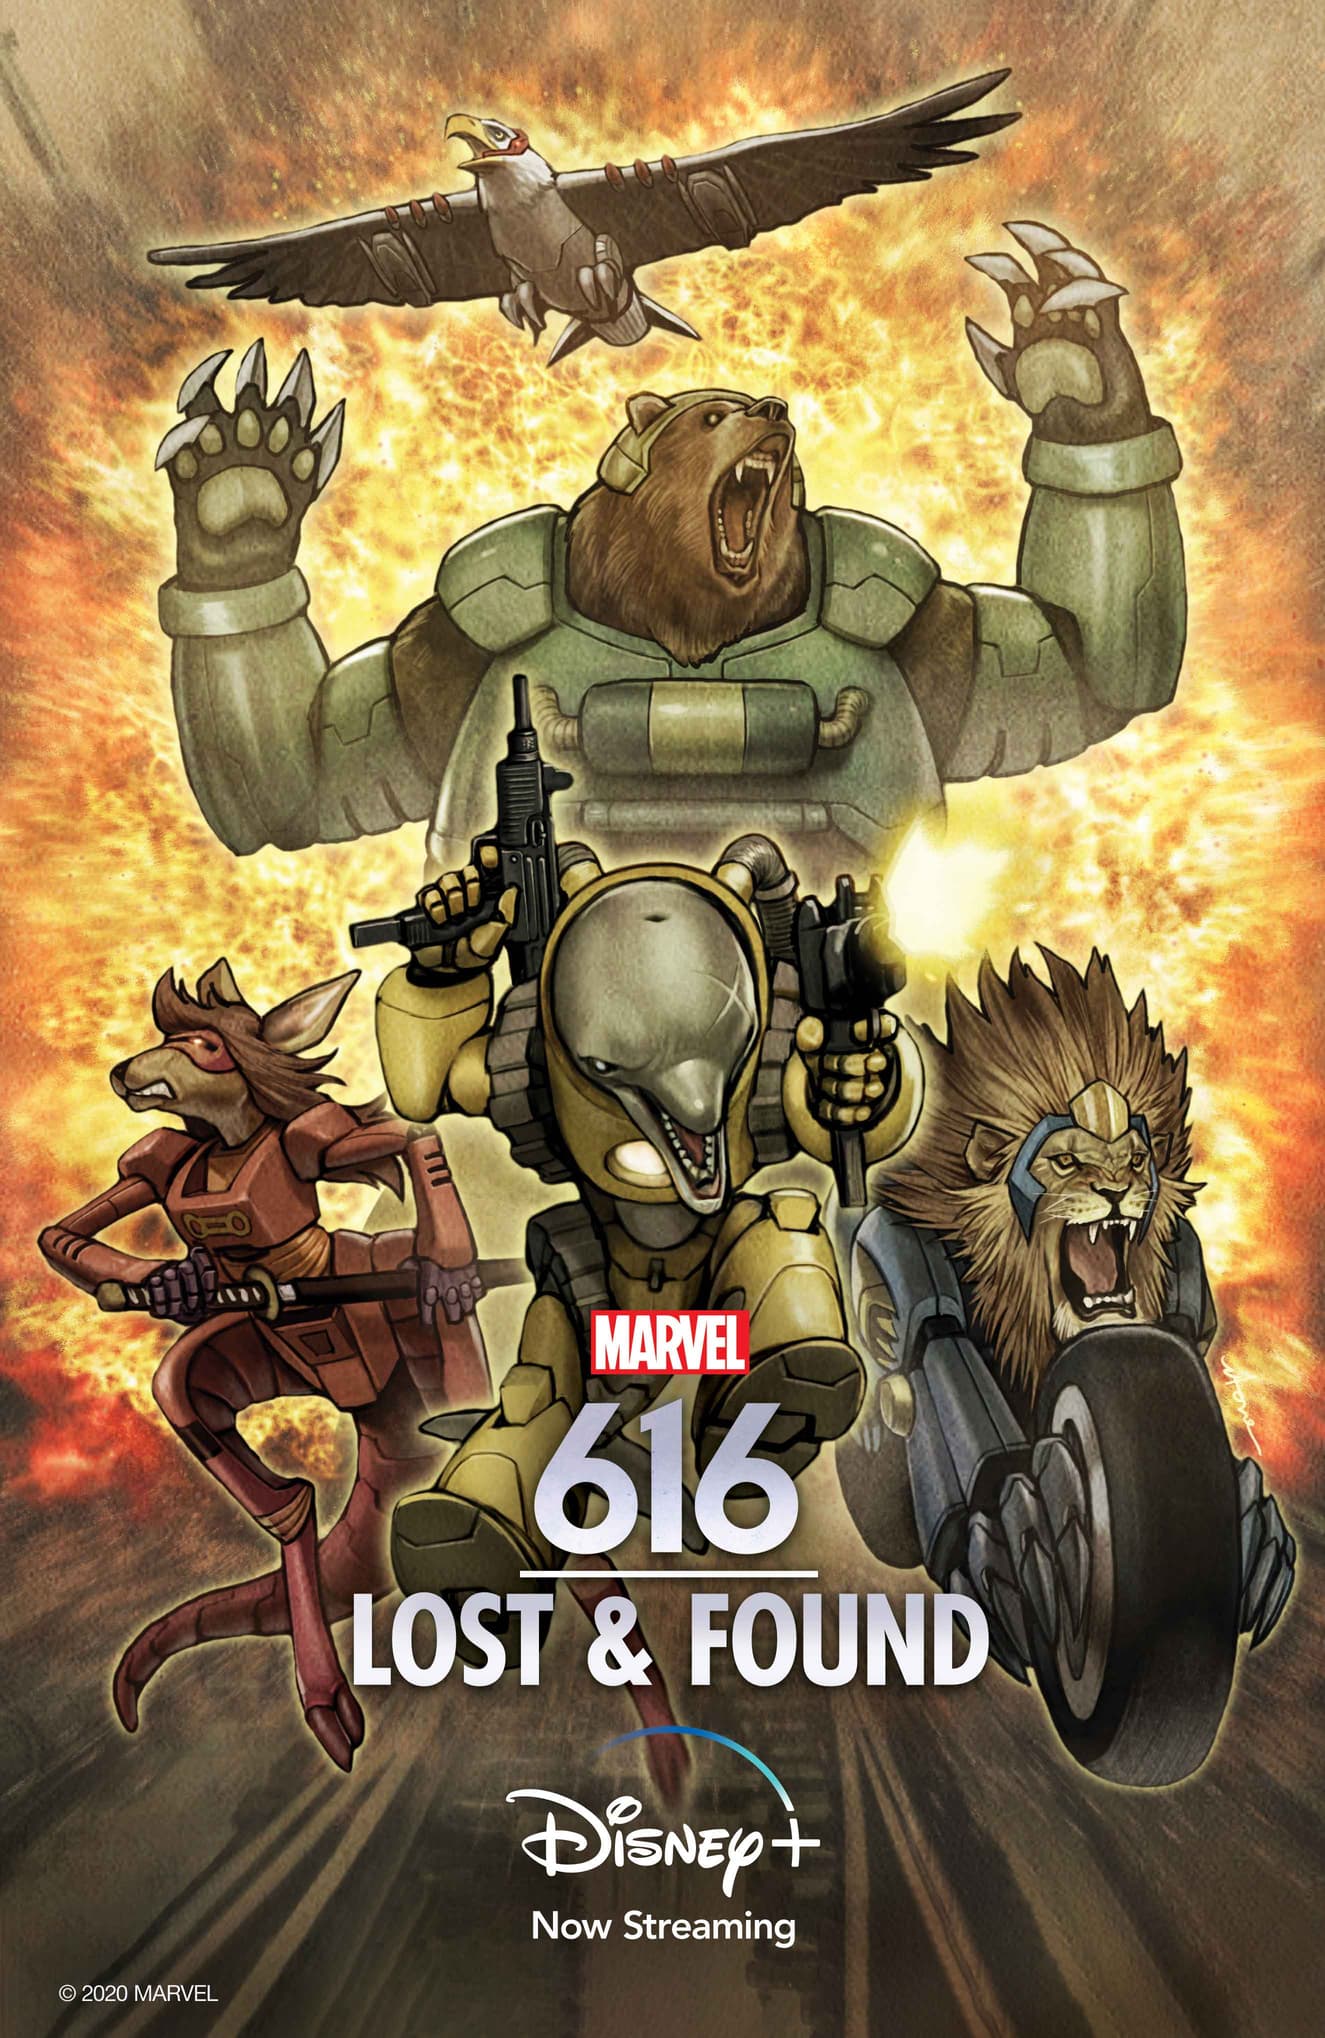 Marvel's 616 Lost and Found